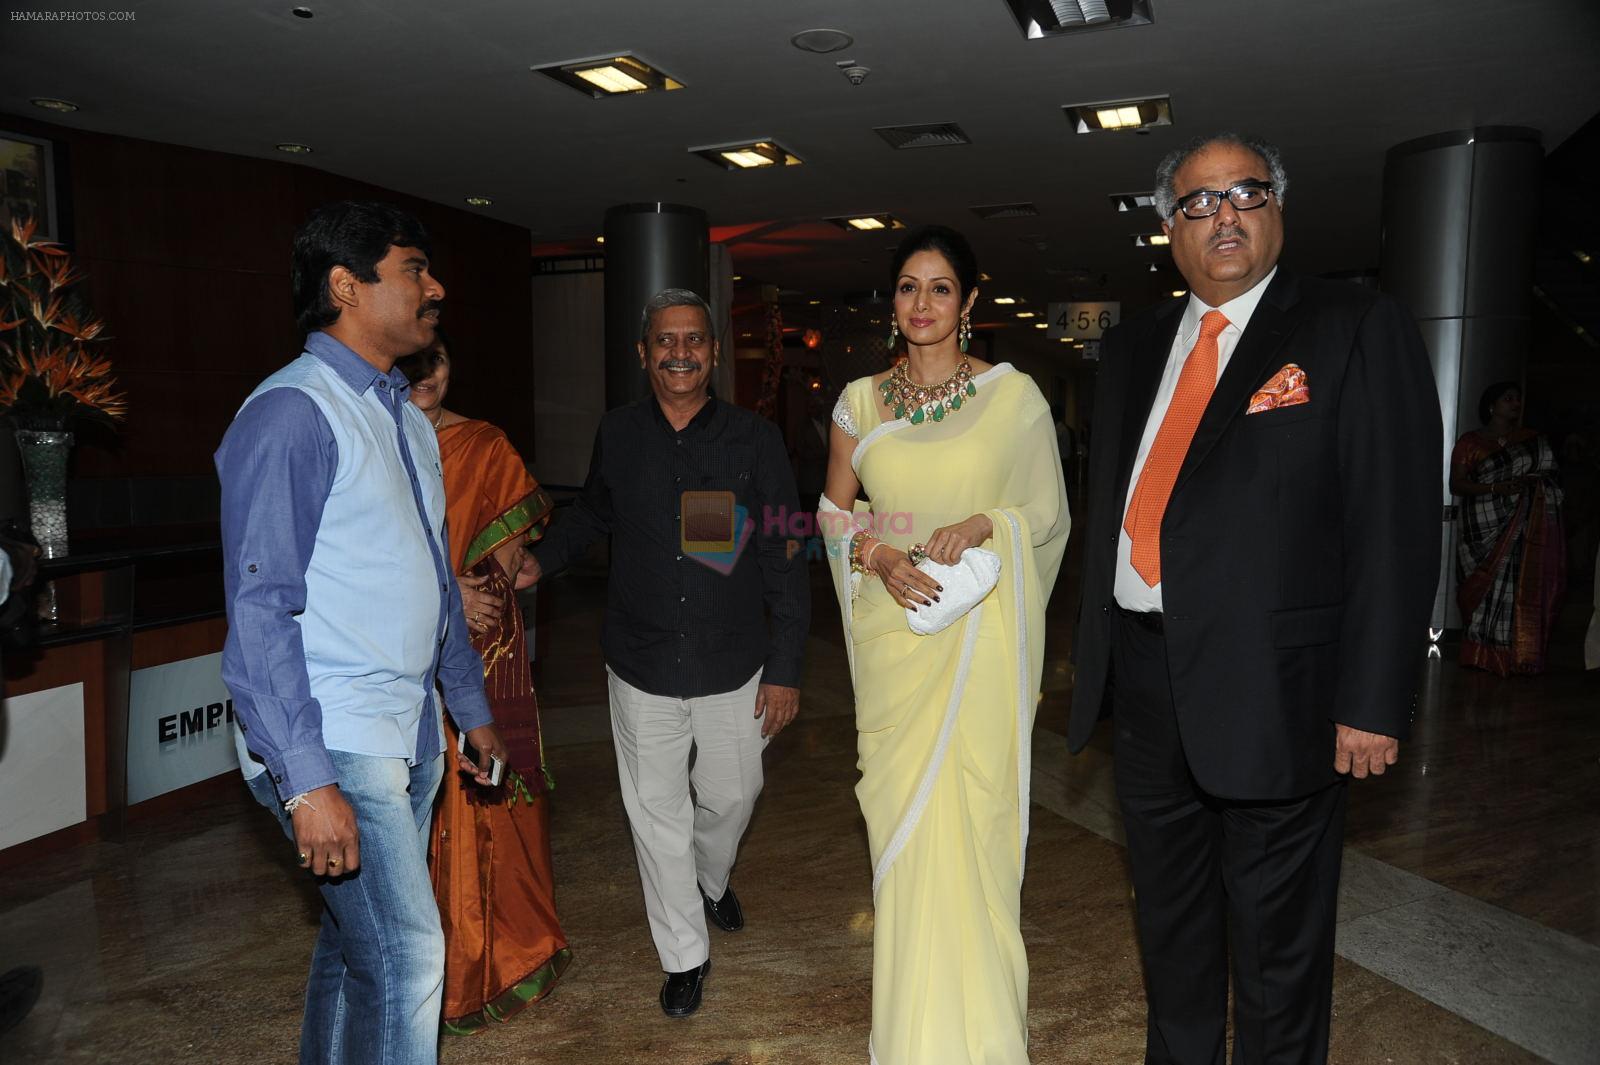 Boney Kapoor and Sridevi at Rajiv Reddy's engagement in Hyderabad on 17th Aug 2014